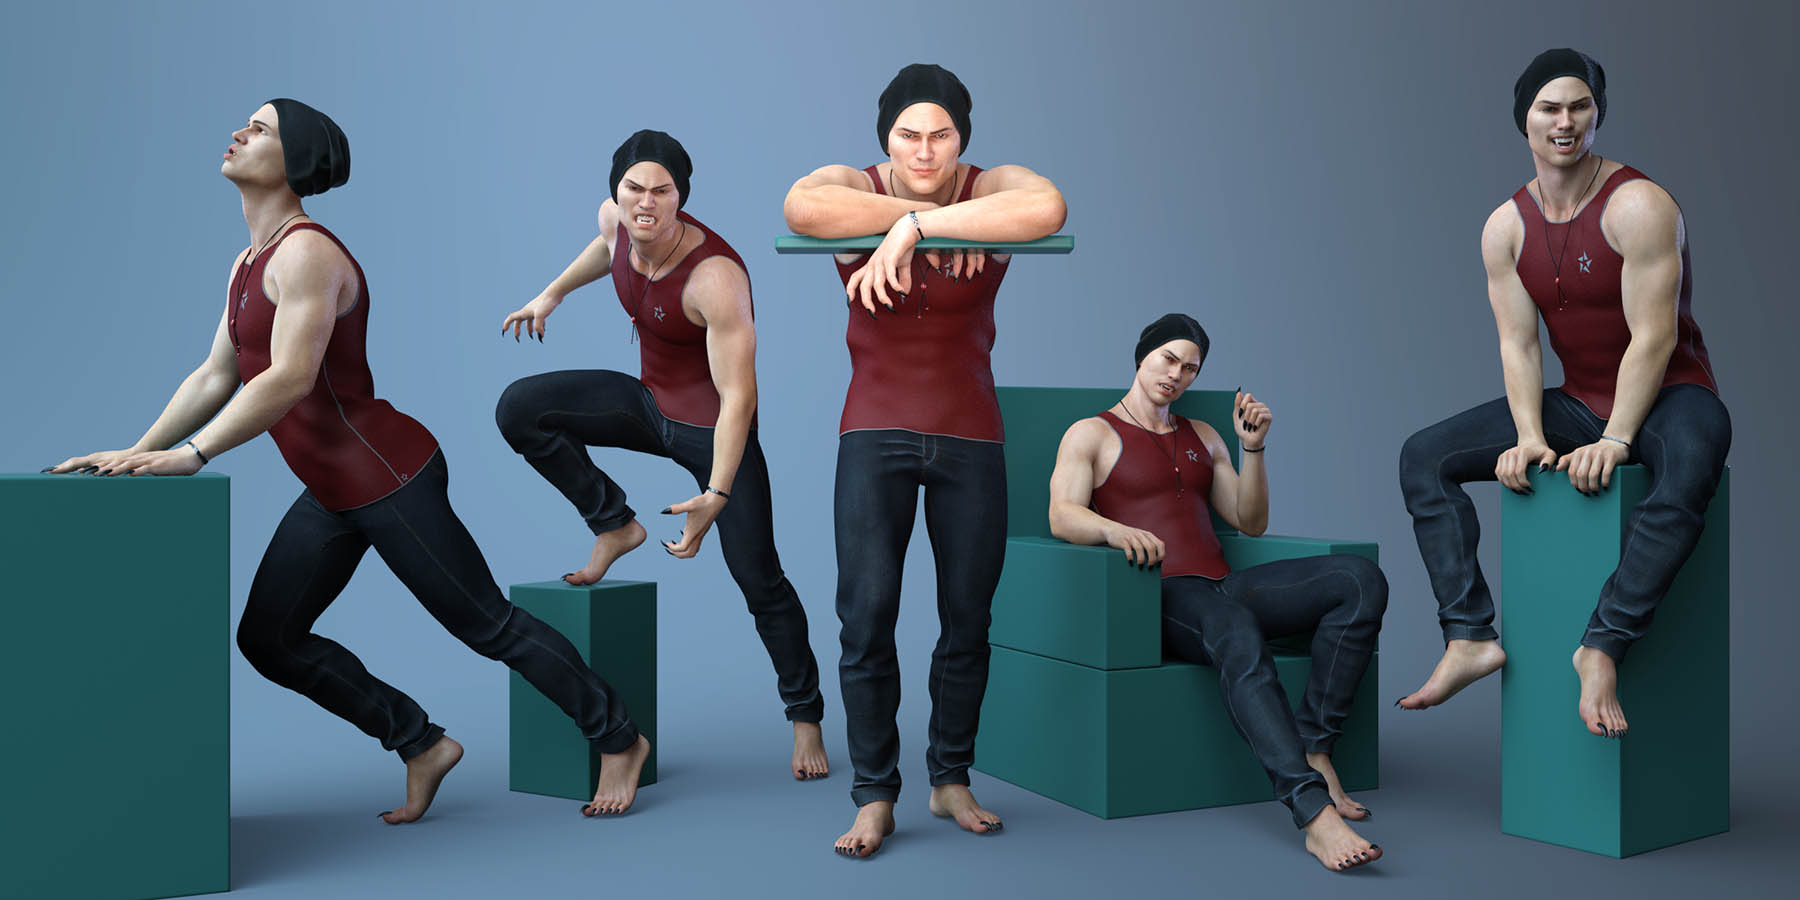 Poses and Expressions for Landon 8 and Genesis 8 Male